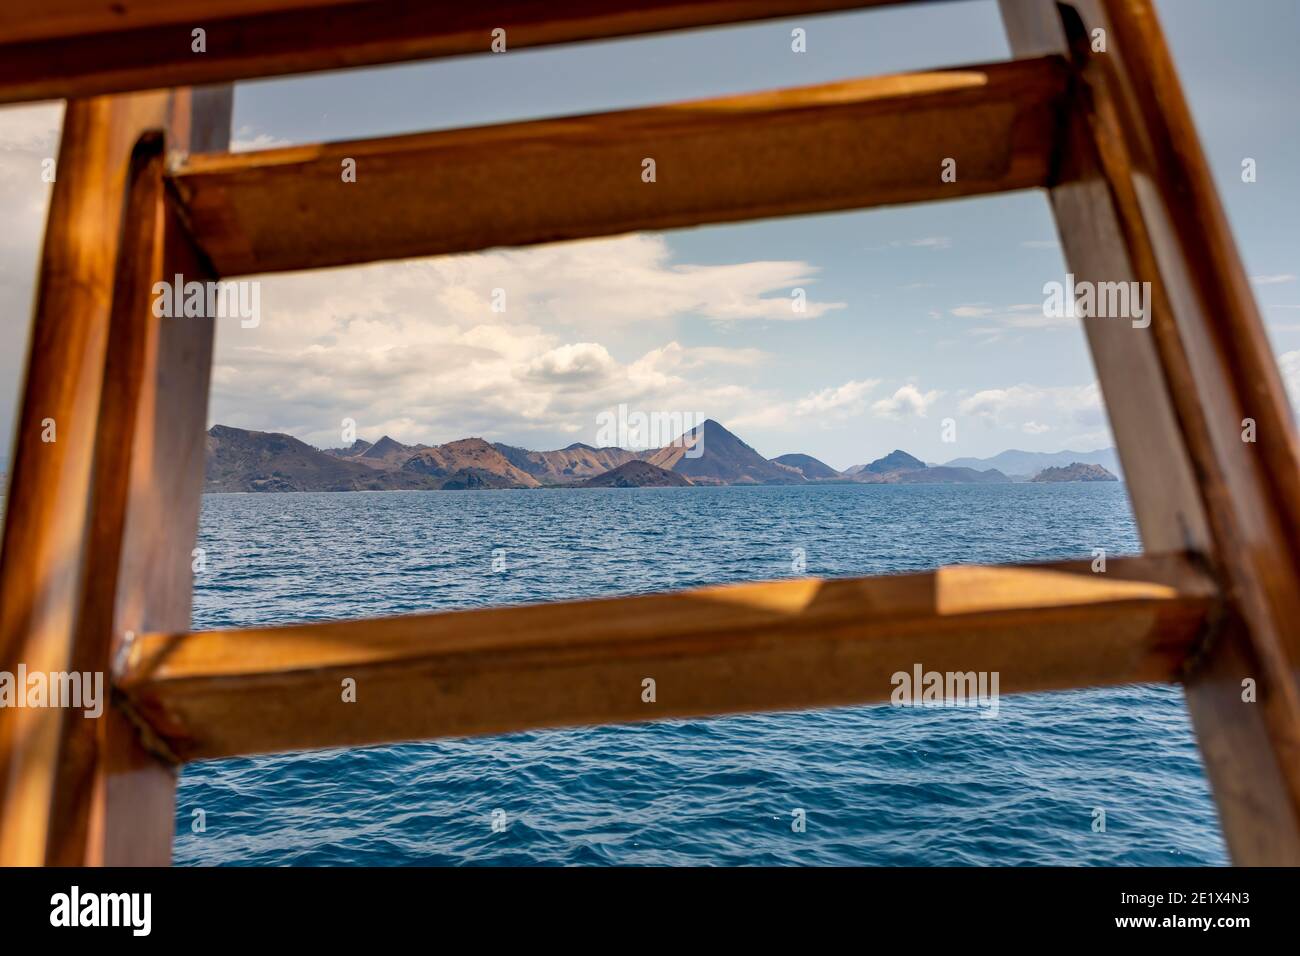 panoramic views out from a wooden cruise ship into turquoise water and an island range at the horizon in Komodo National Marine Park Stock Photo